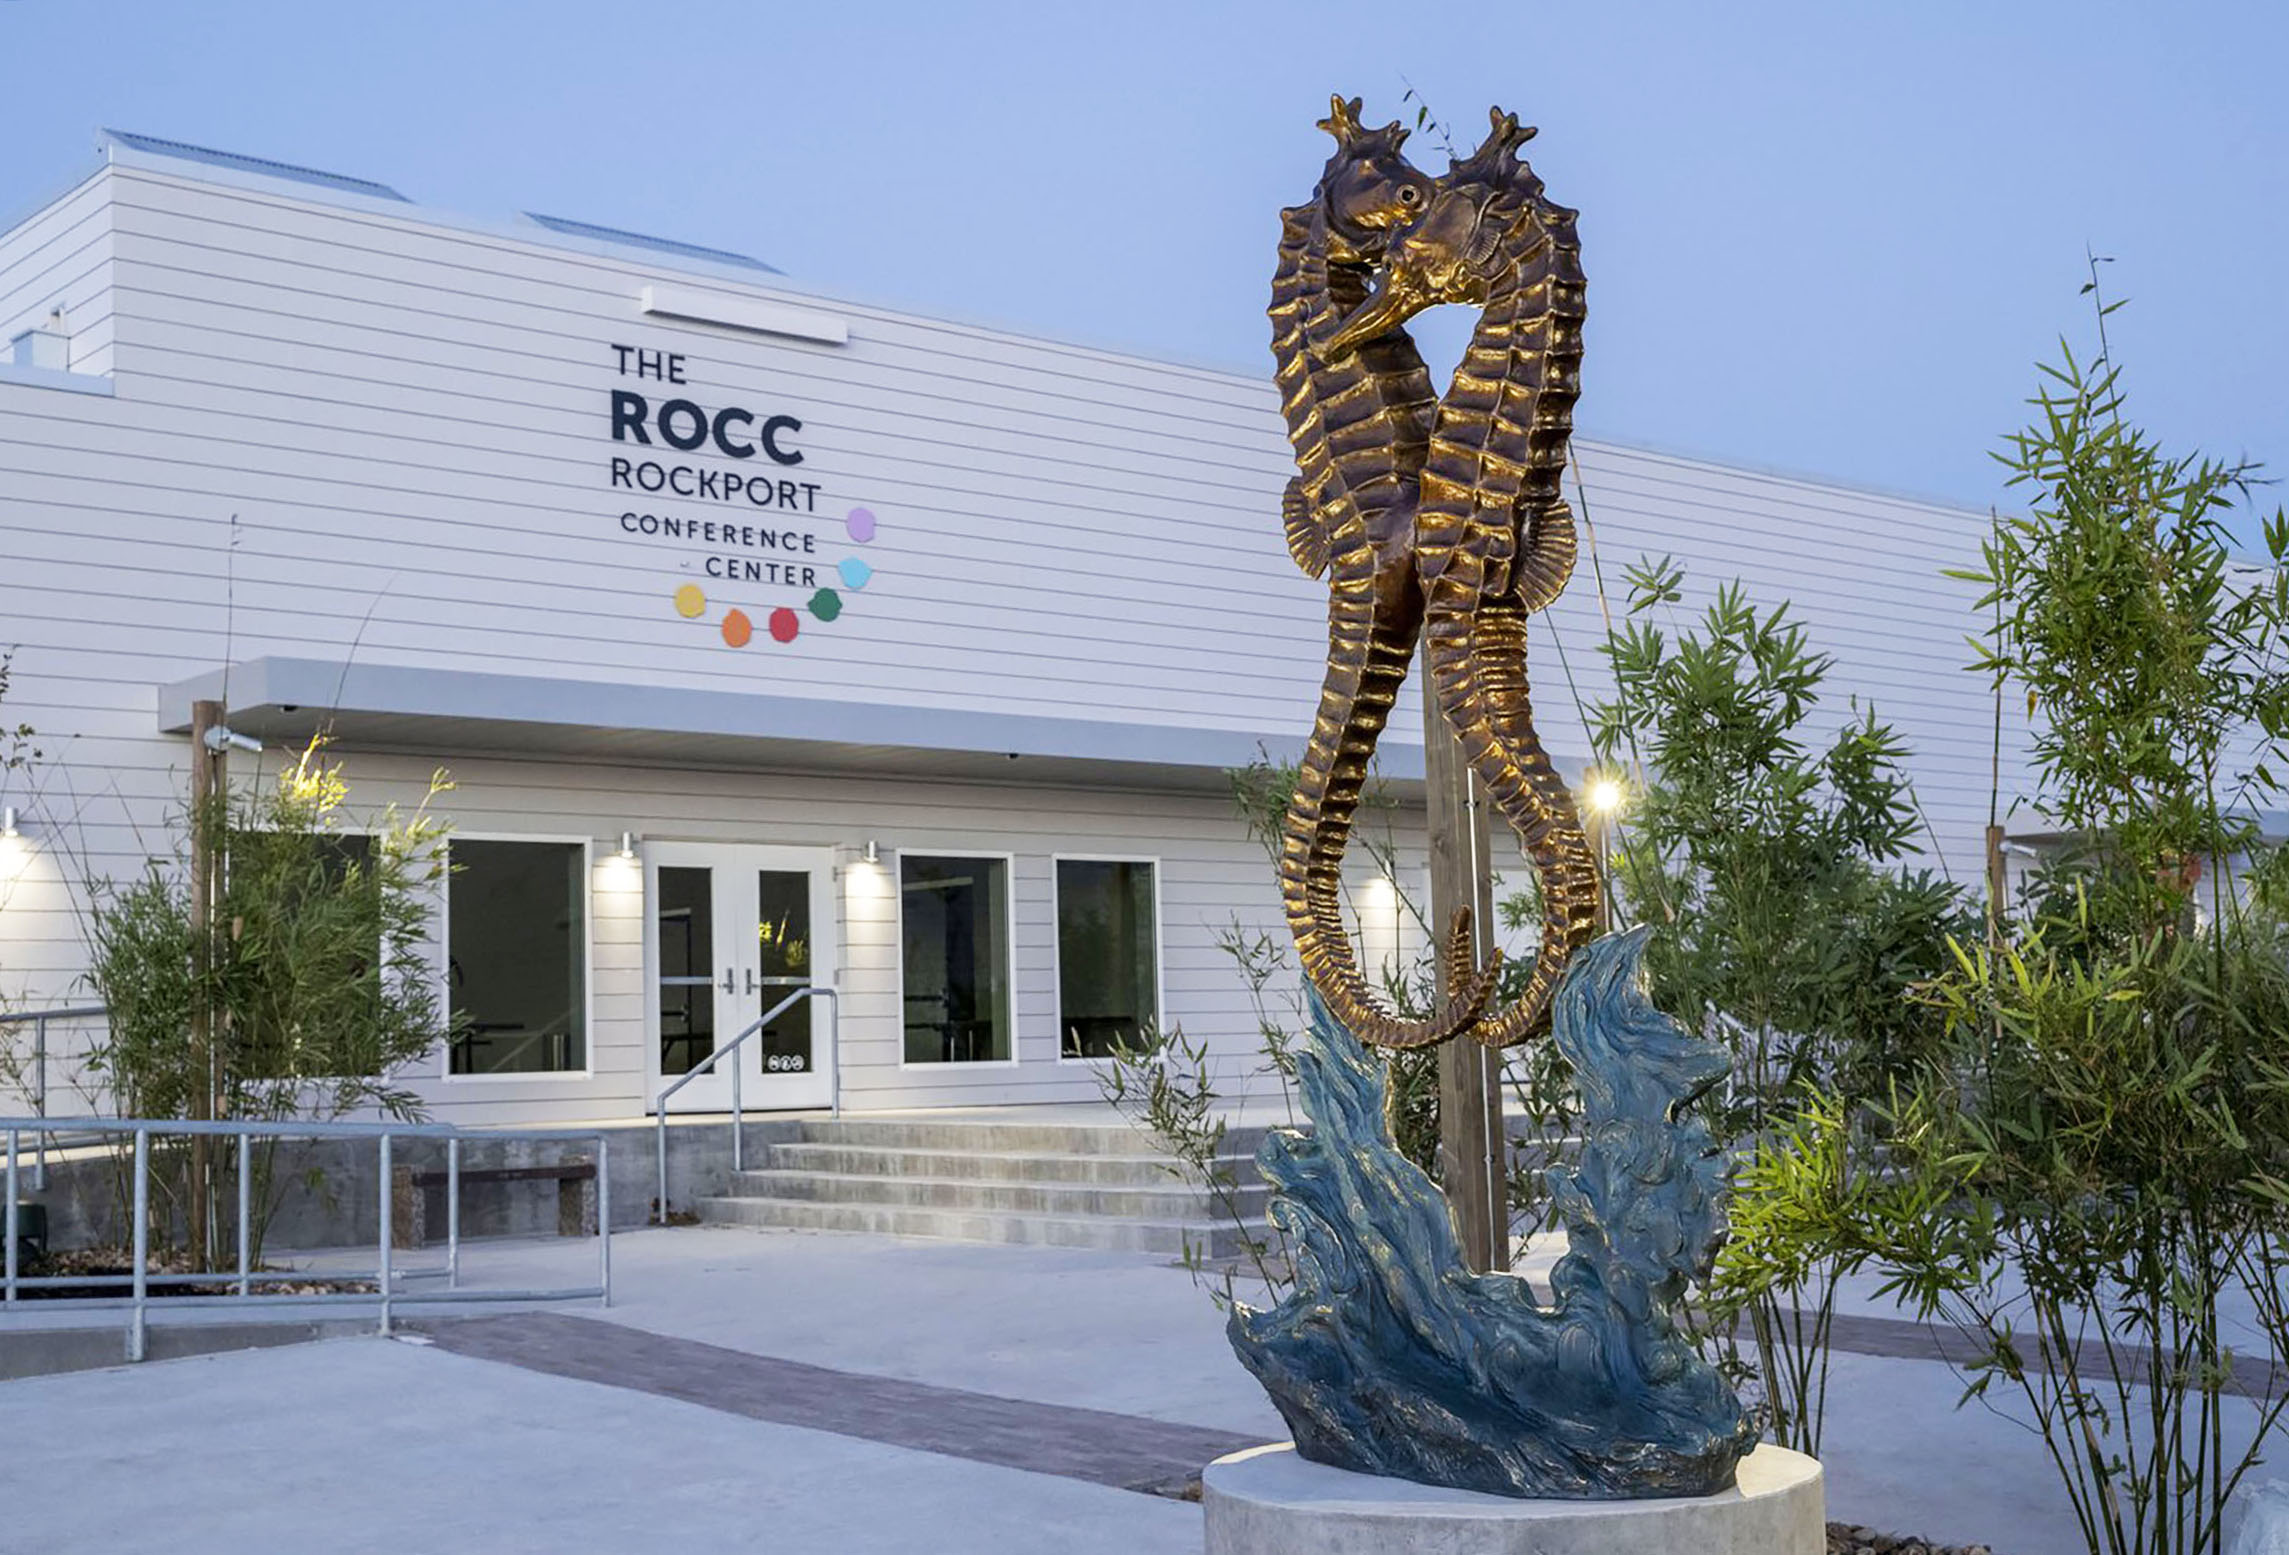 A tall statue featuring two gold seahorses facing each other stands in front of a white building, "The ROCC Rockport Conference Center." 